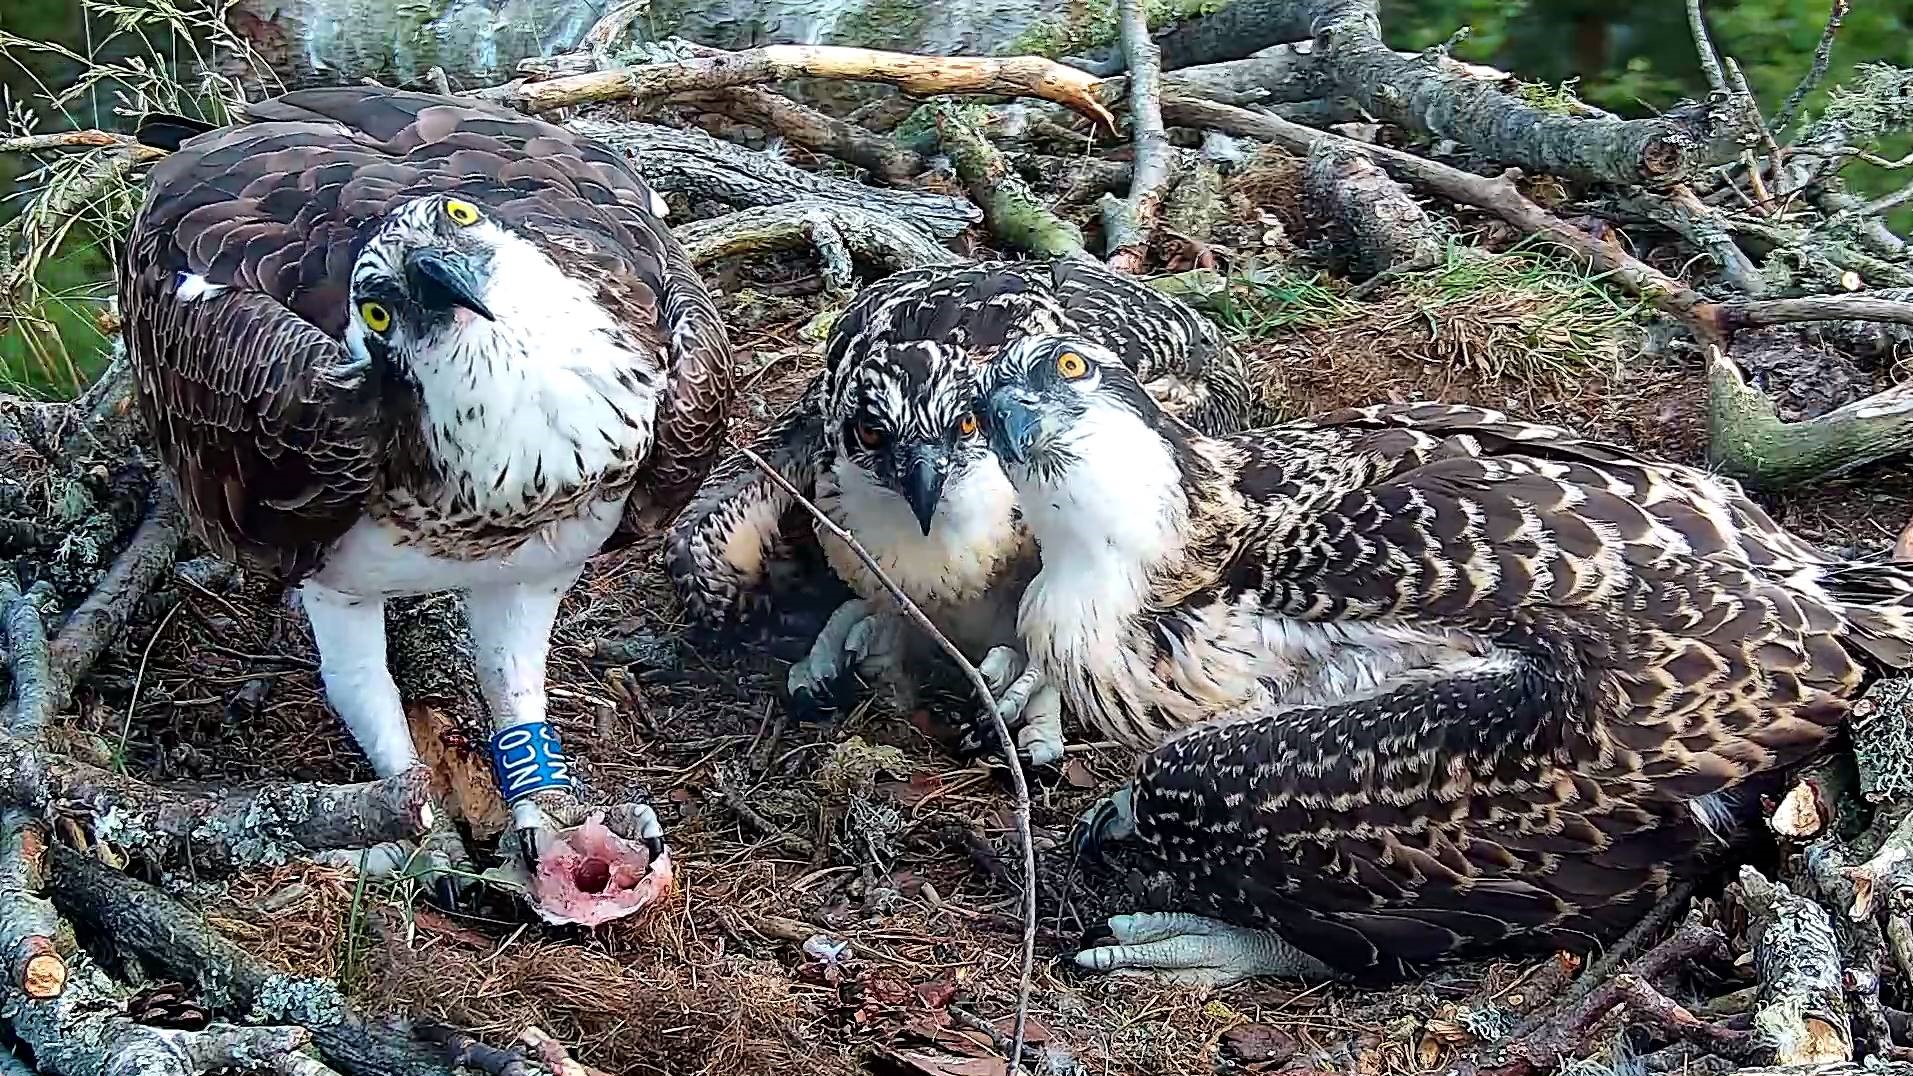 It won’t be long until the ospreys start to fledge